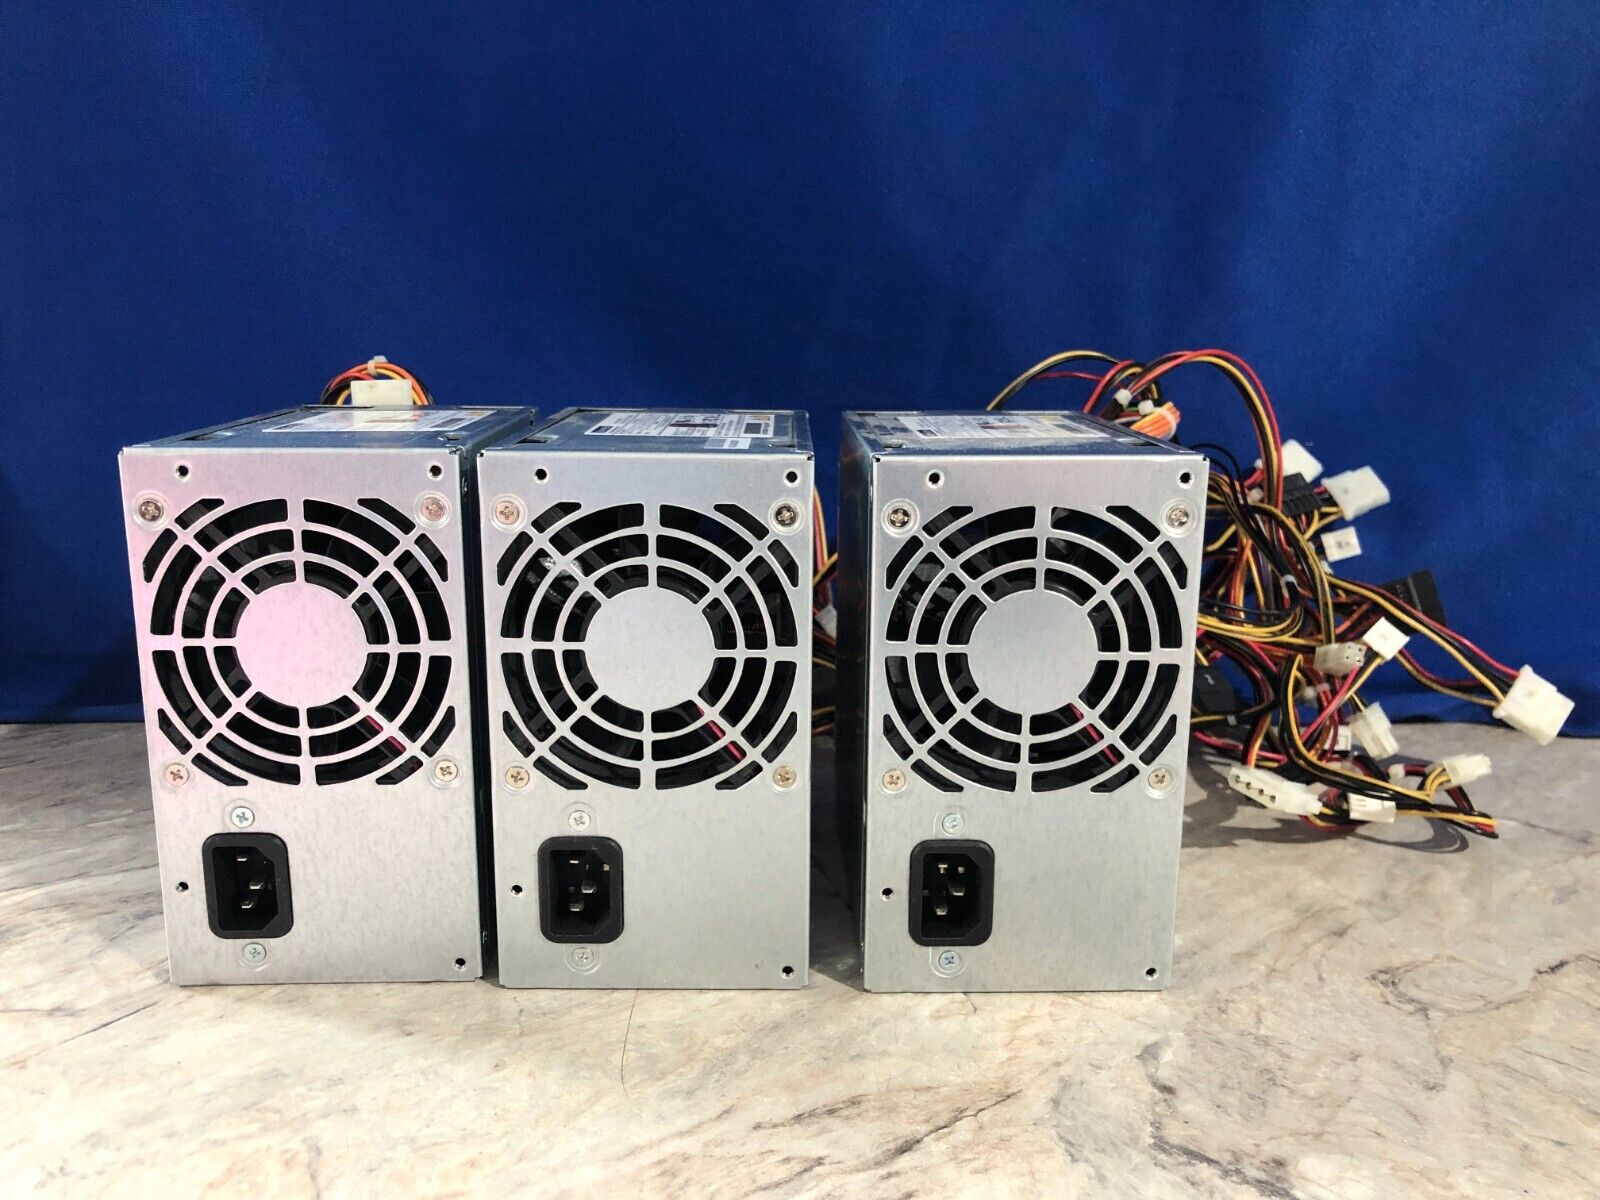 Lot of 3x Advantech DPS-300AB-70 A Power Supply for PC Computer Tower - Read